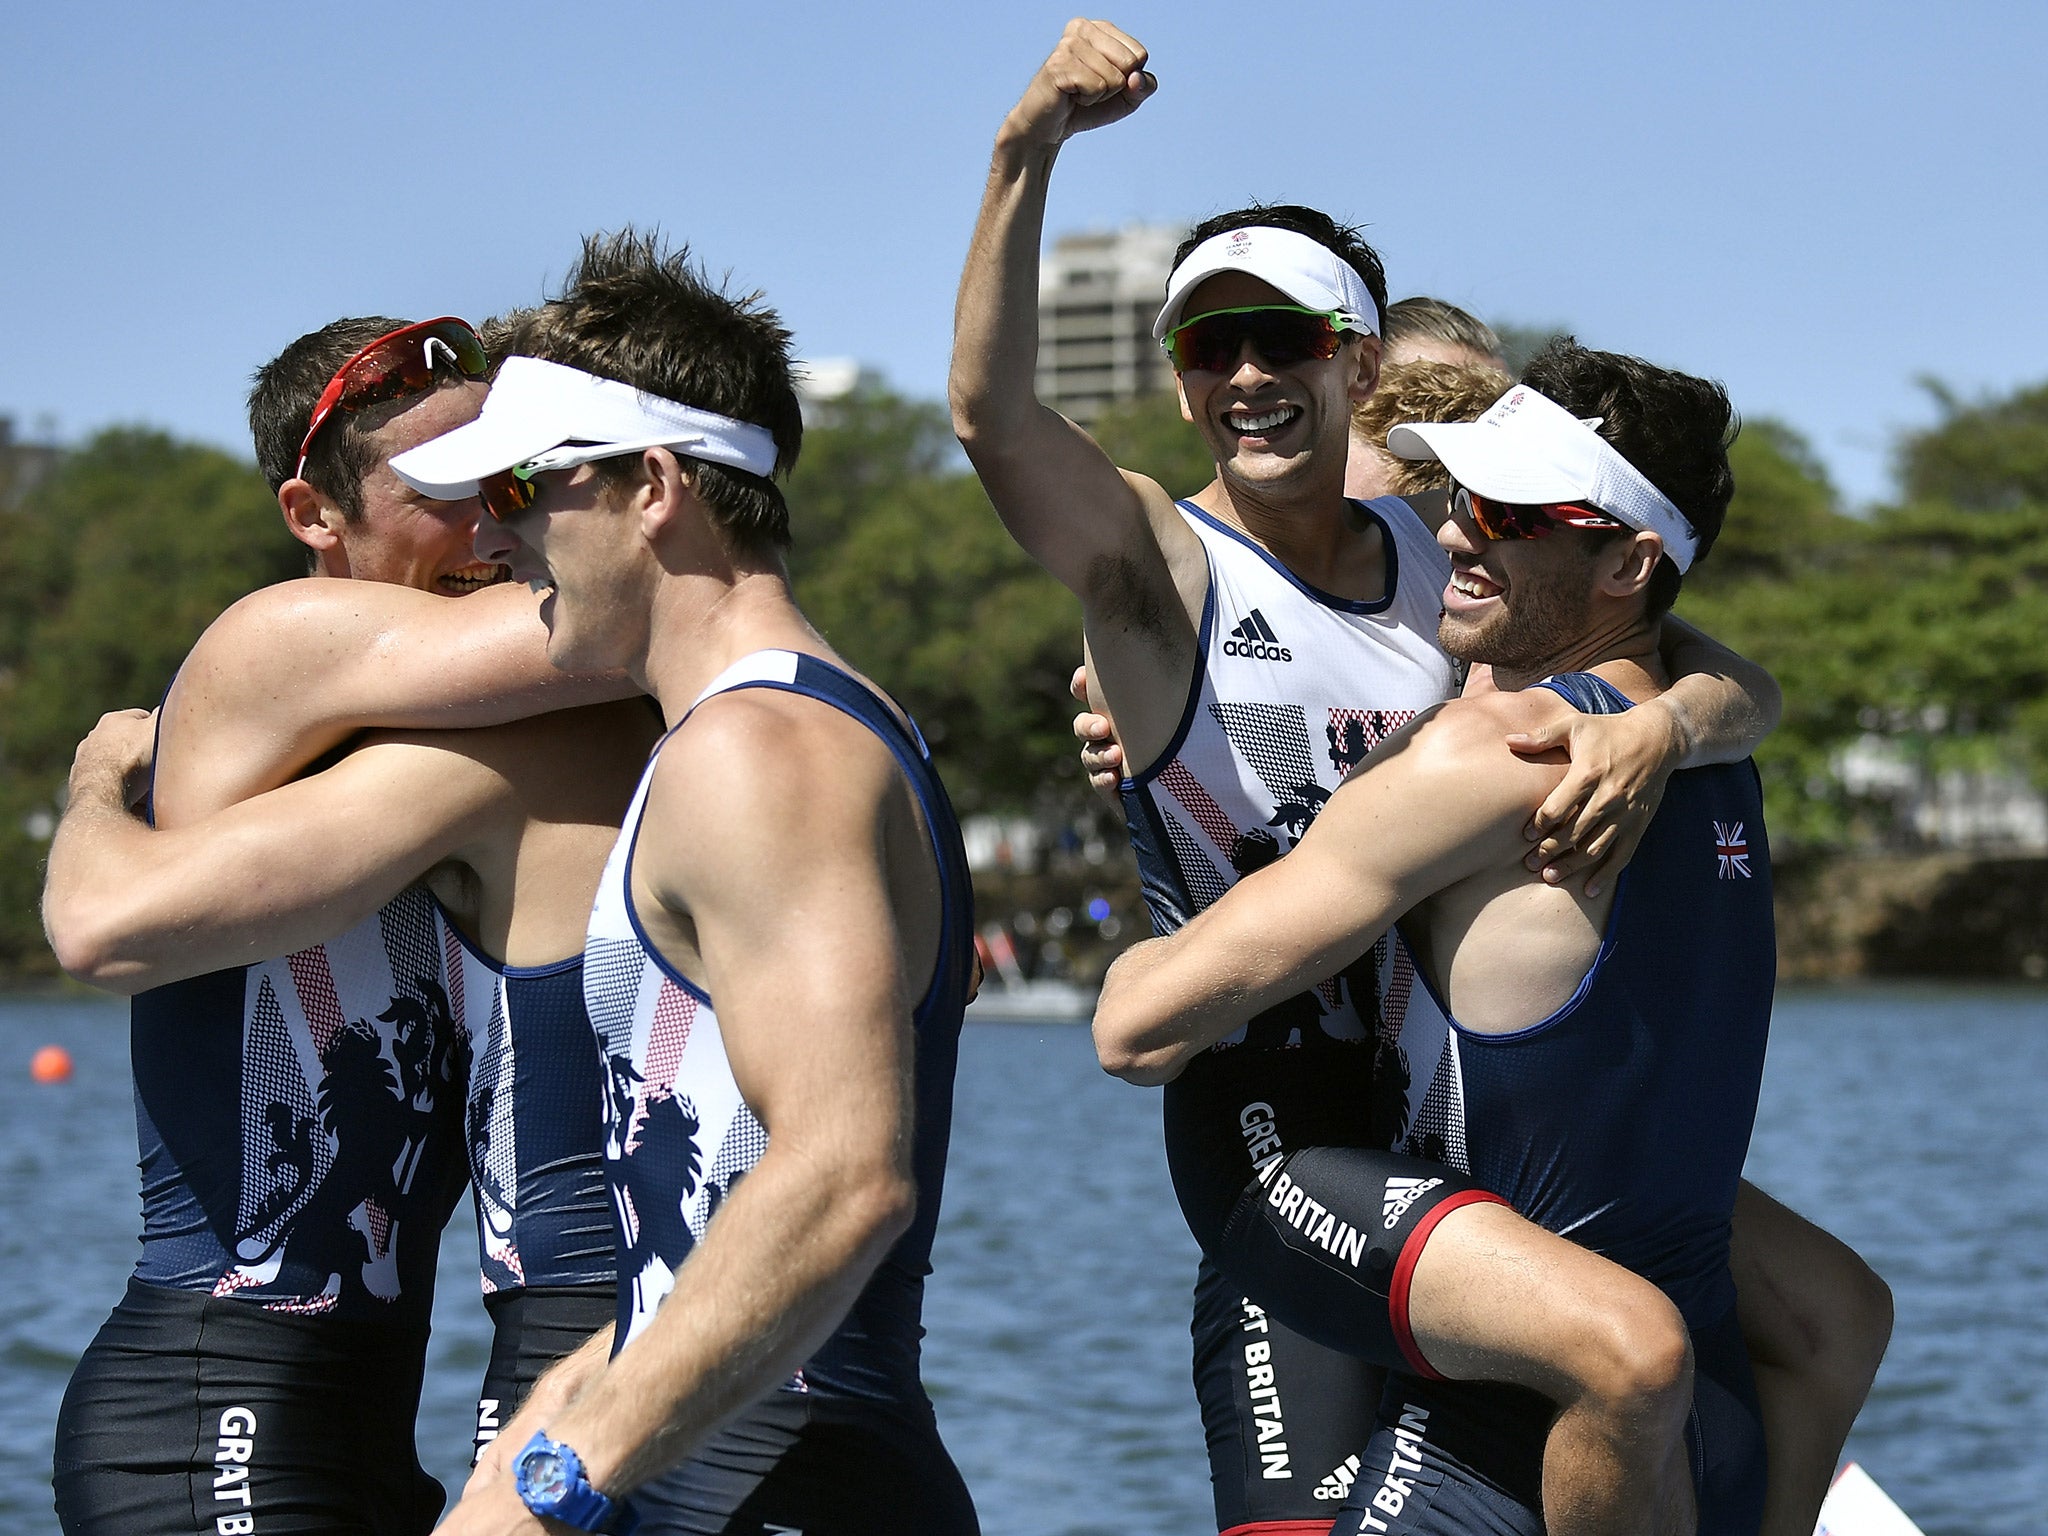 Members of Team GB's men's eight rowing team celebrate their gold medal success at Rio 2016